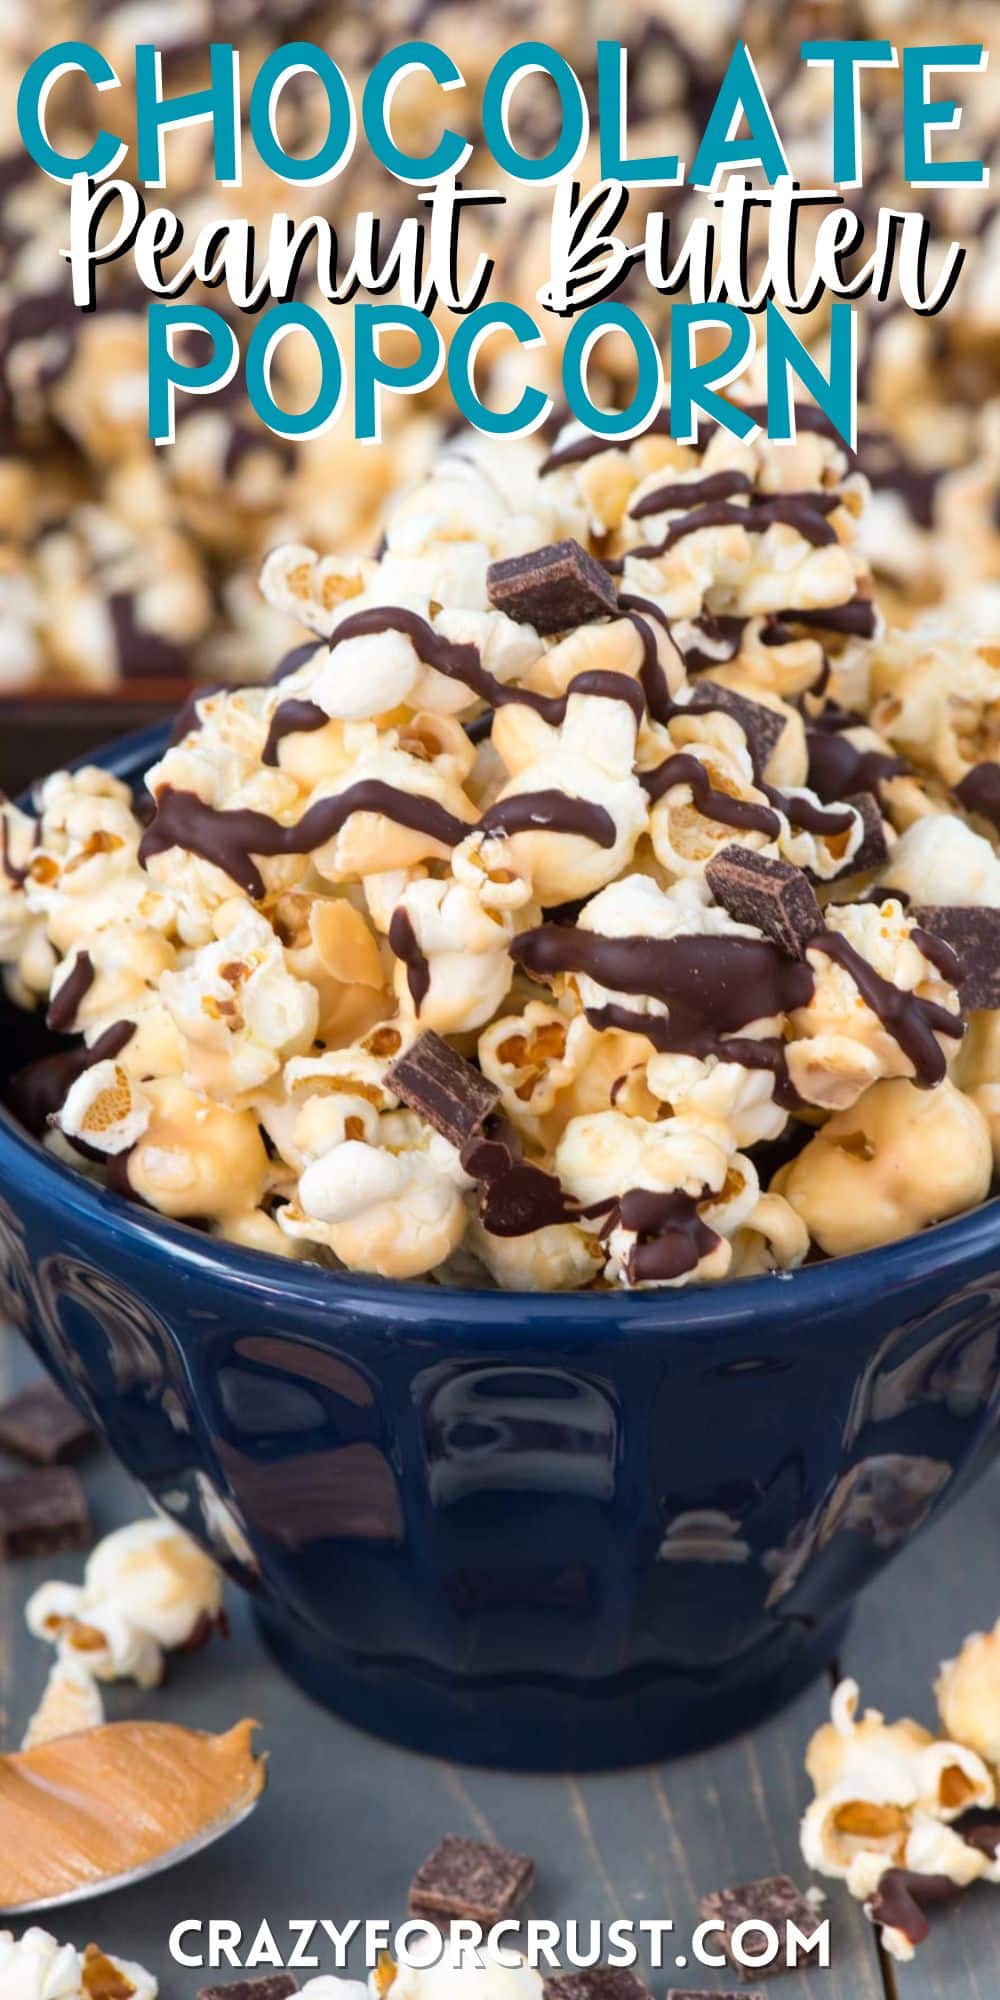 peanut butter popcorn with chocolate drizzled over it in a blue bowl with words on the image.